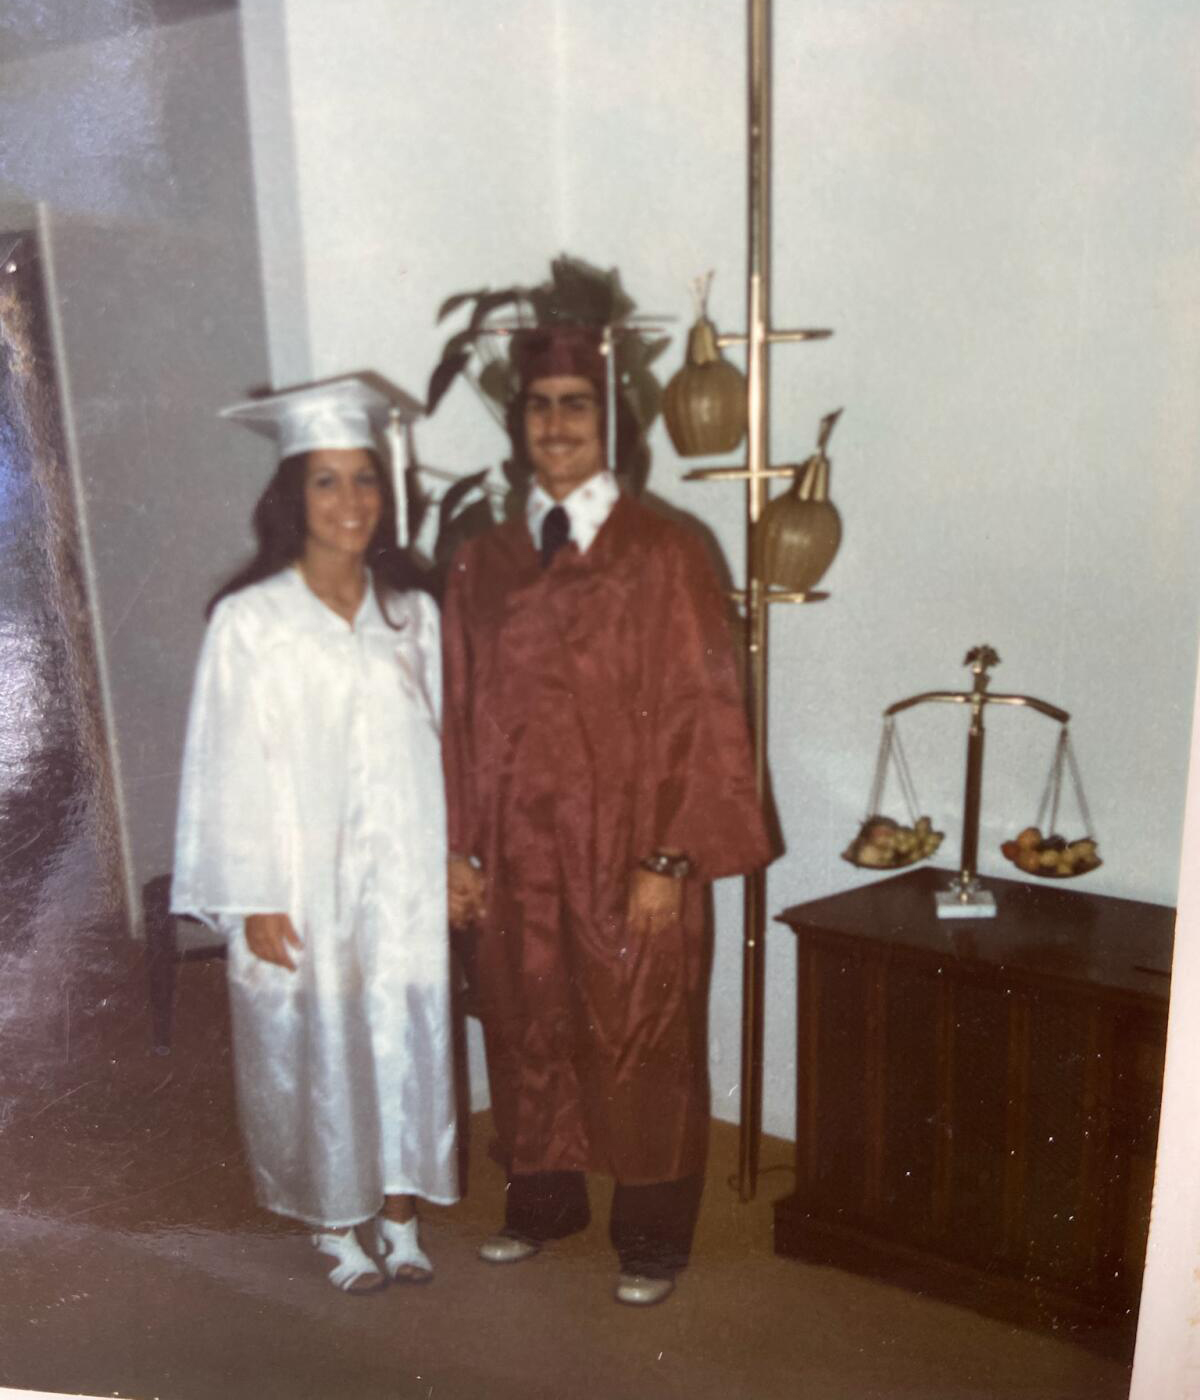 Glenda and Scott Webster on their graduation day from Franklin High School in 1974. Glenda stands on the left in a white cap and gown. Scott stands on the right in a red cap and gown.